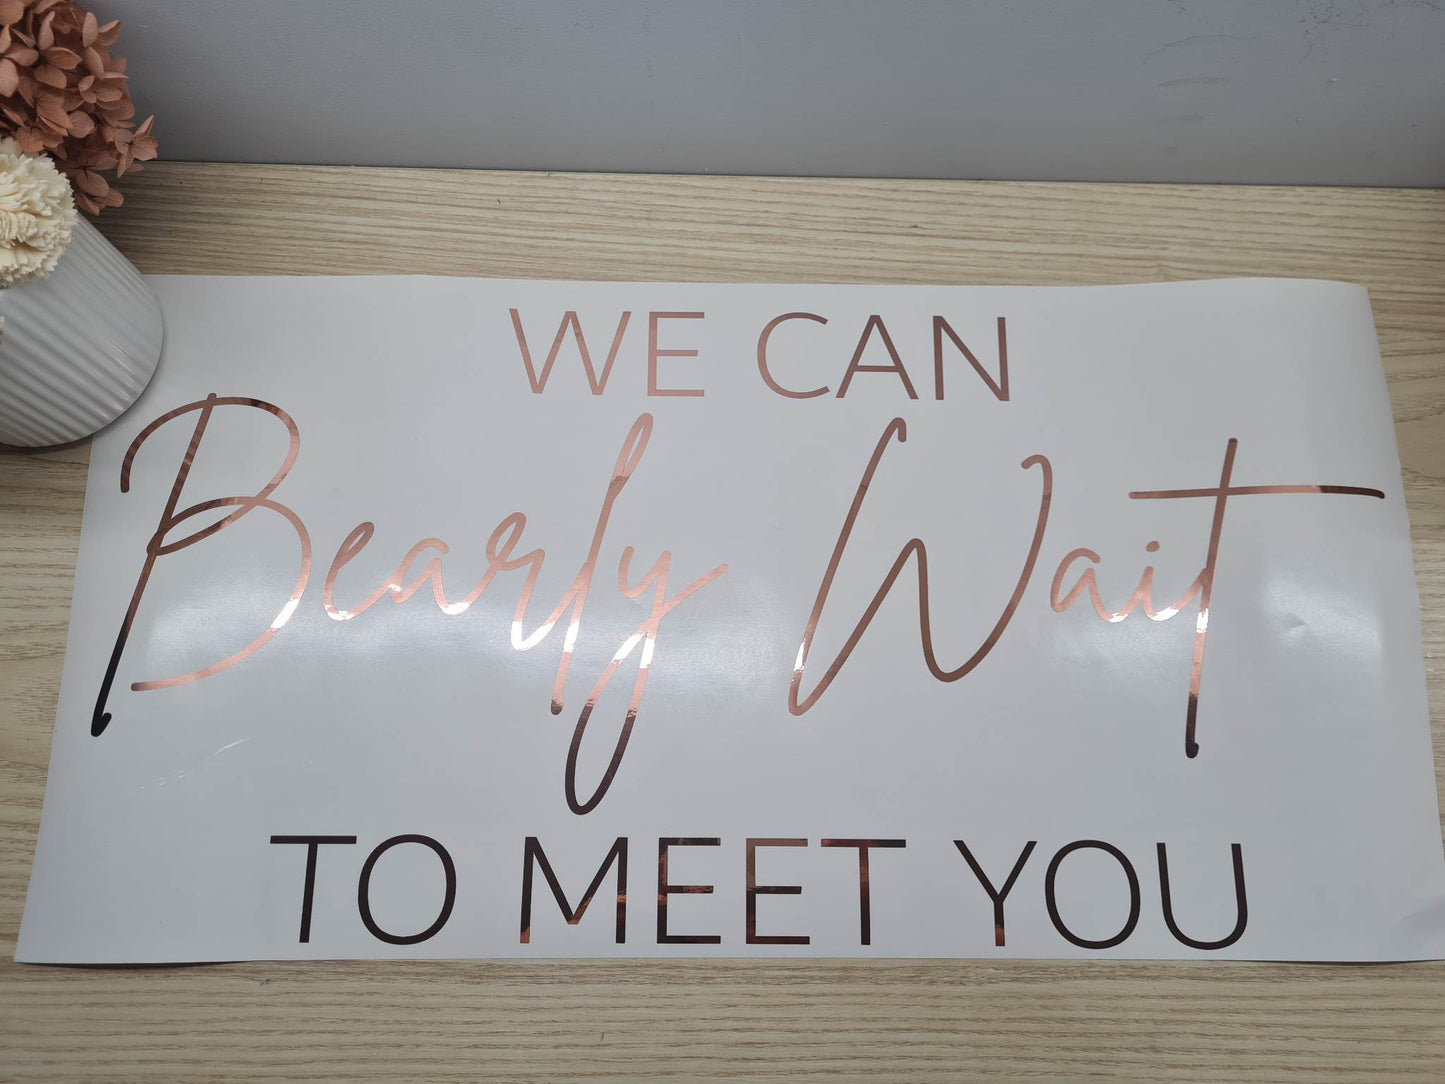 We Can Bearly Wait to Meet You Backdrop Sticker/ Decal